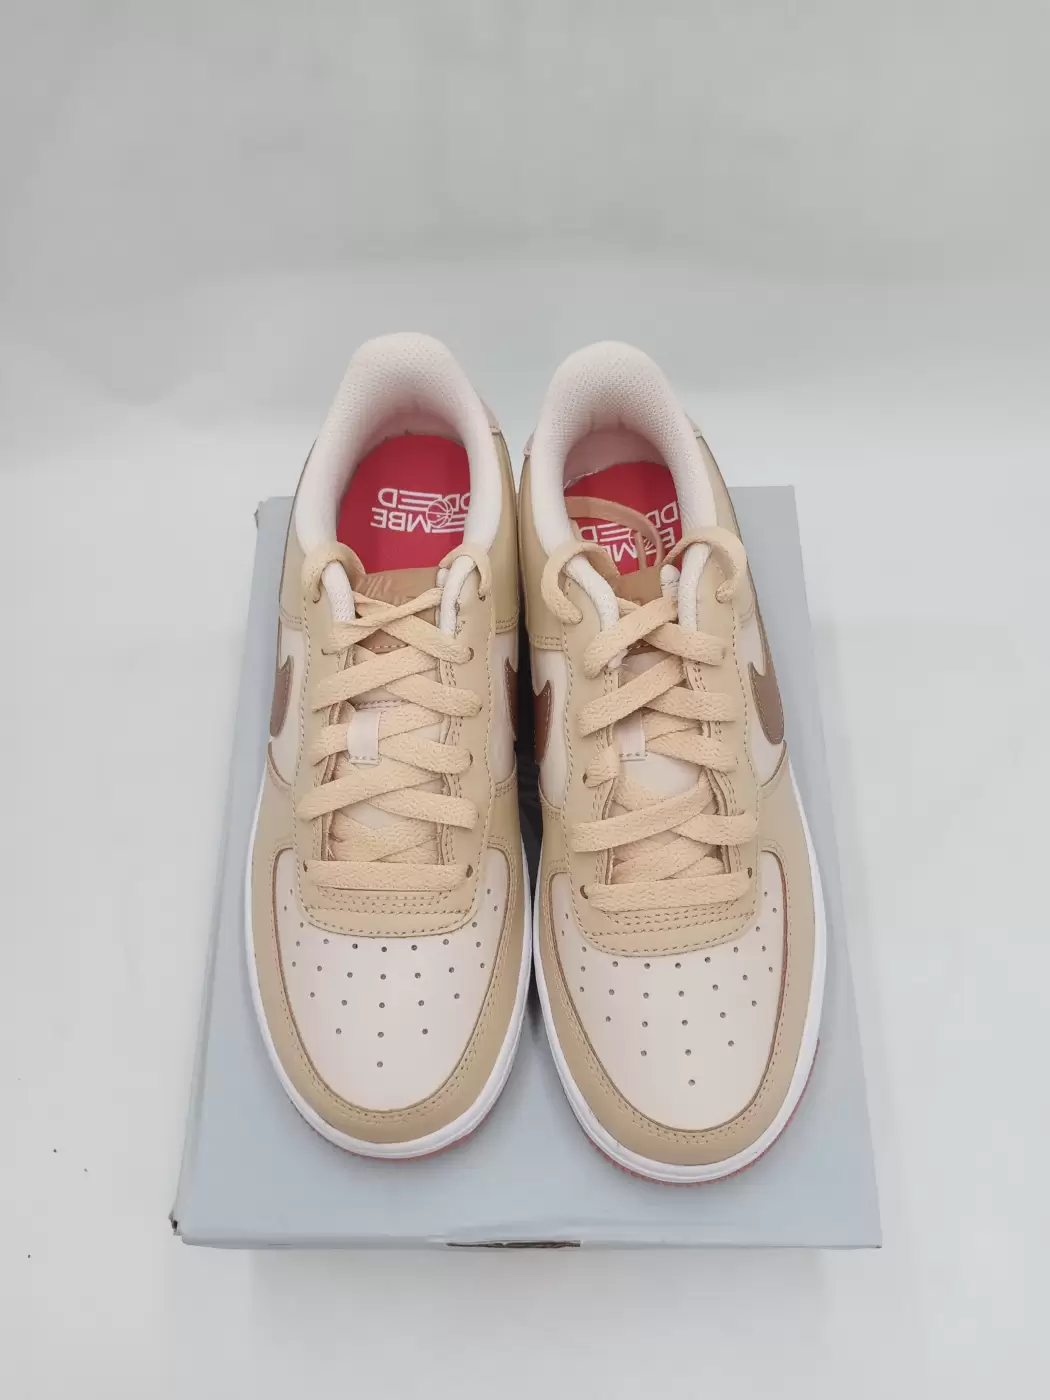 Nike Air Force 1 Low LV8 (GS) Pearl White Sesame DQ5973 200 Size